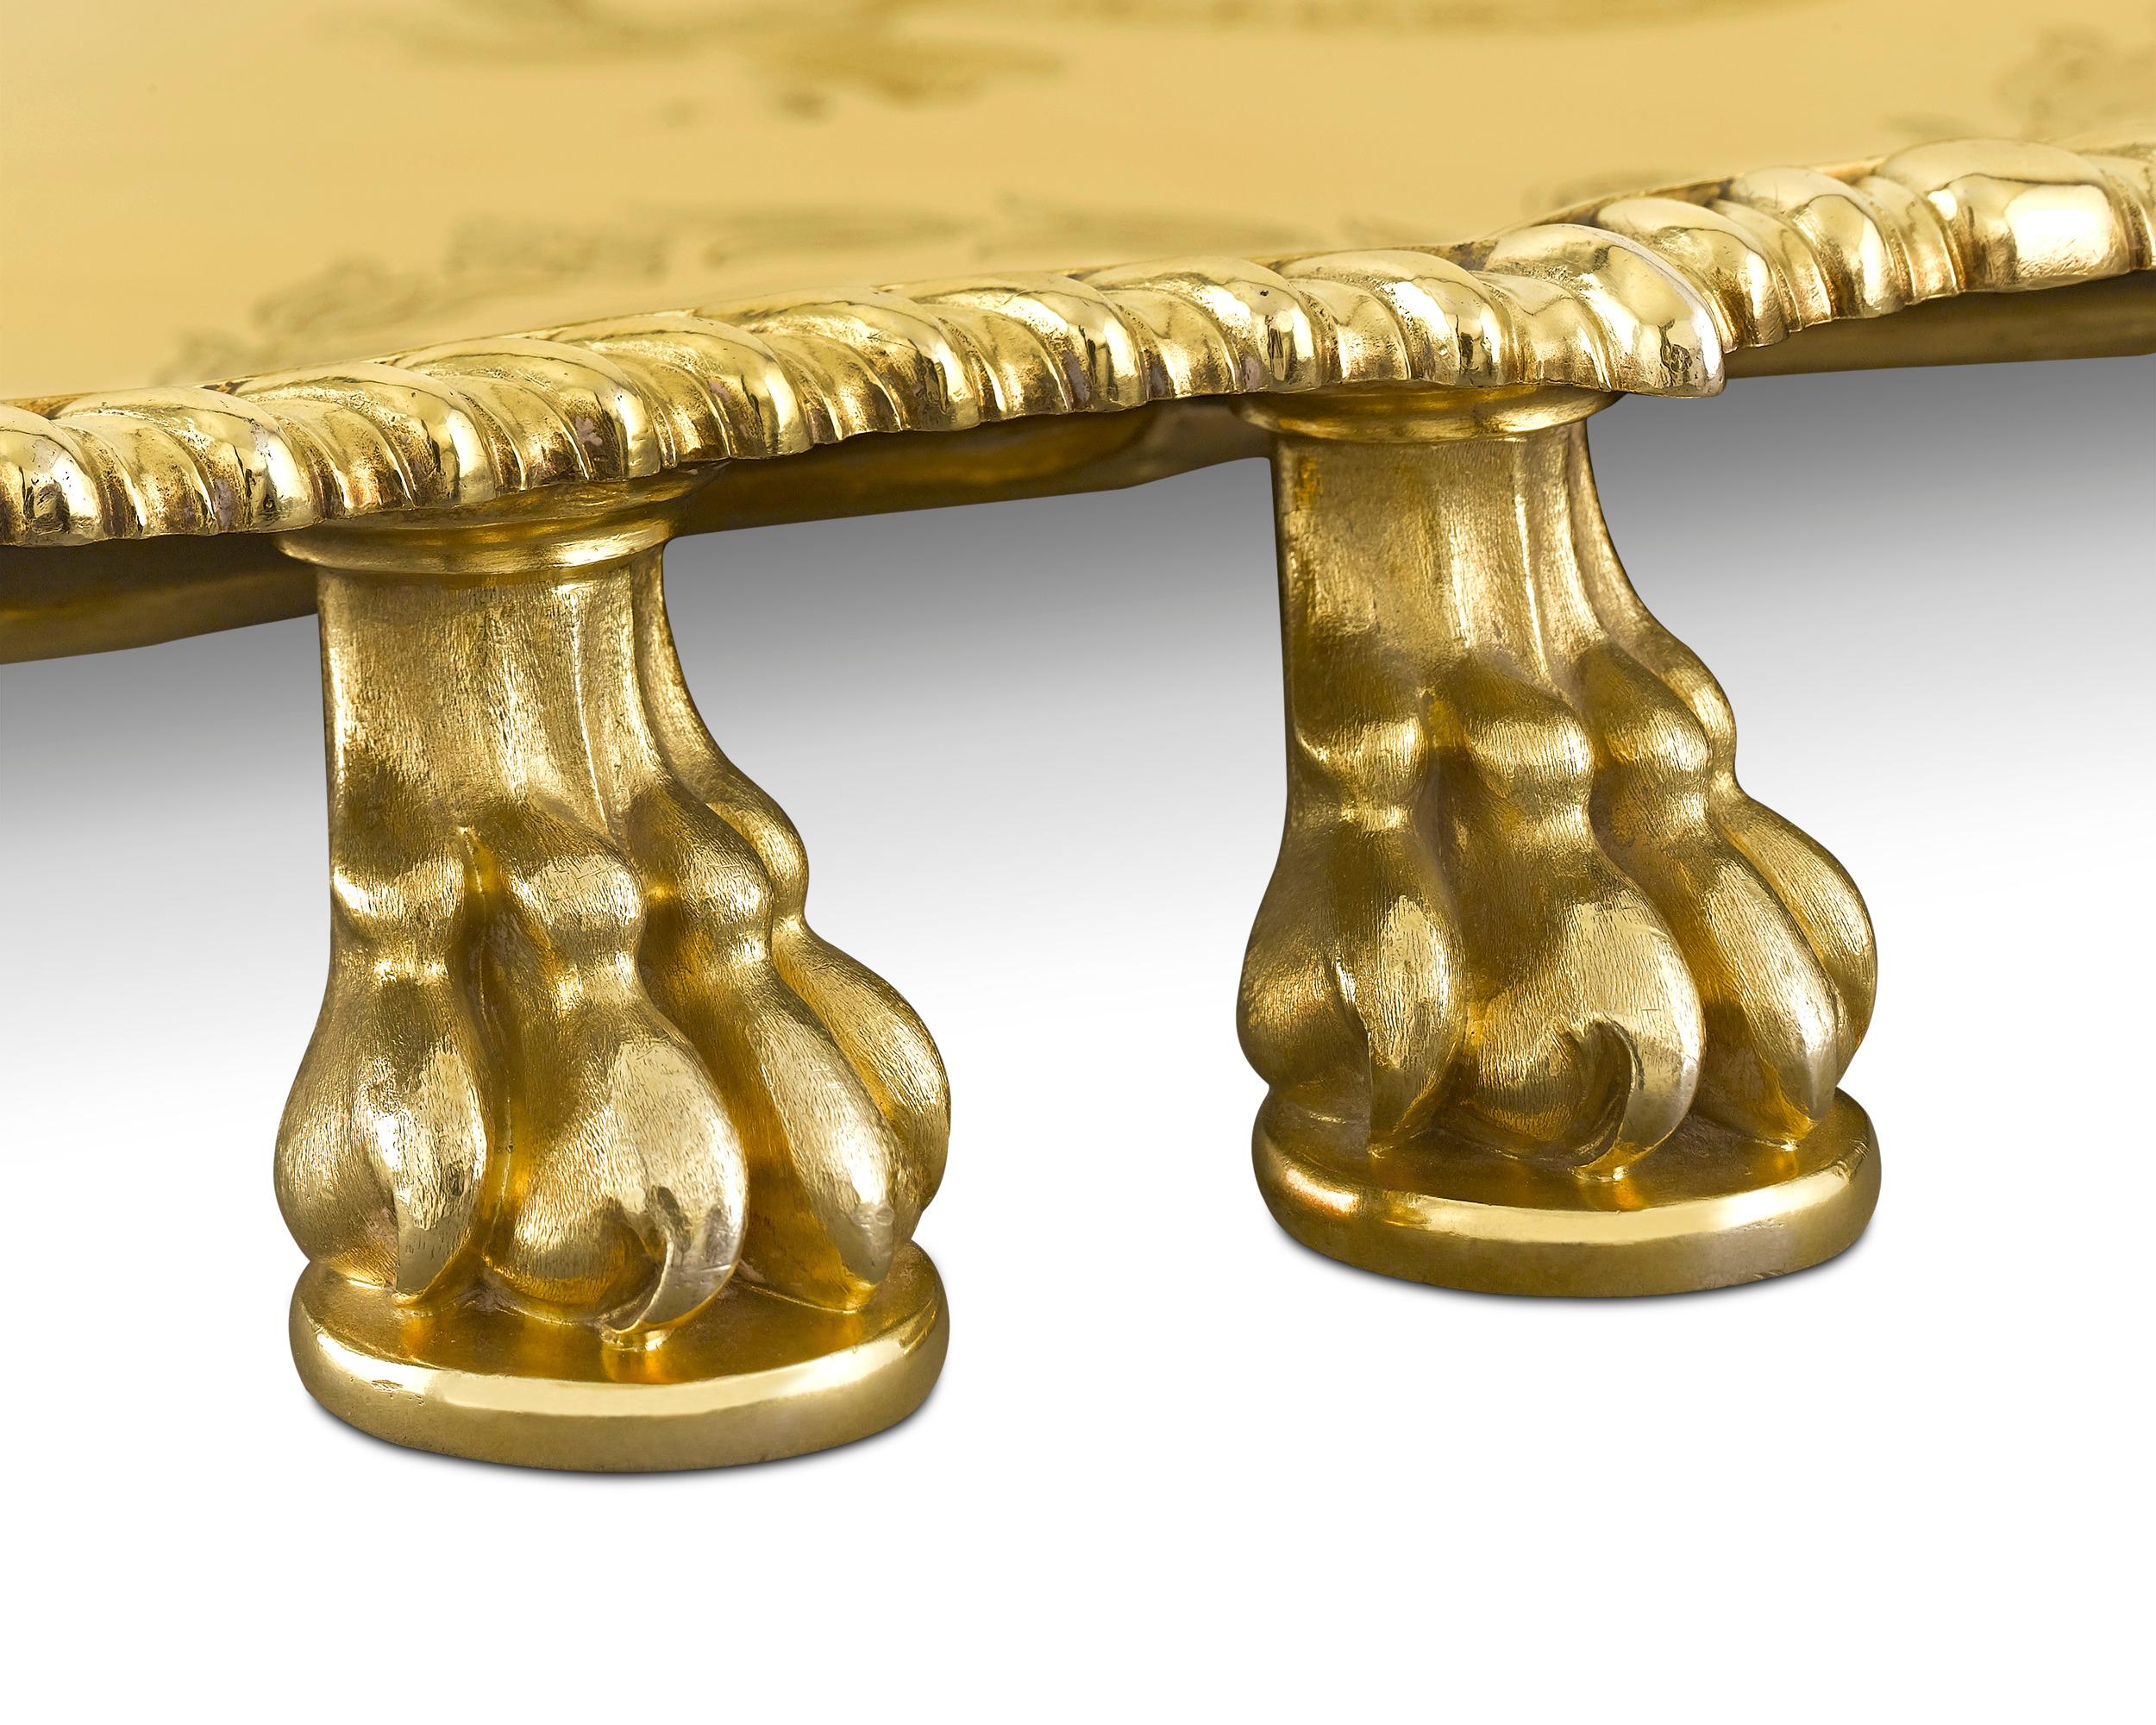 19th Century Regency Silver Gilt Tray by Rundell and Jackson